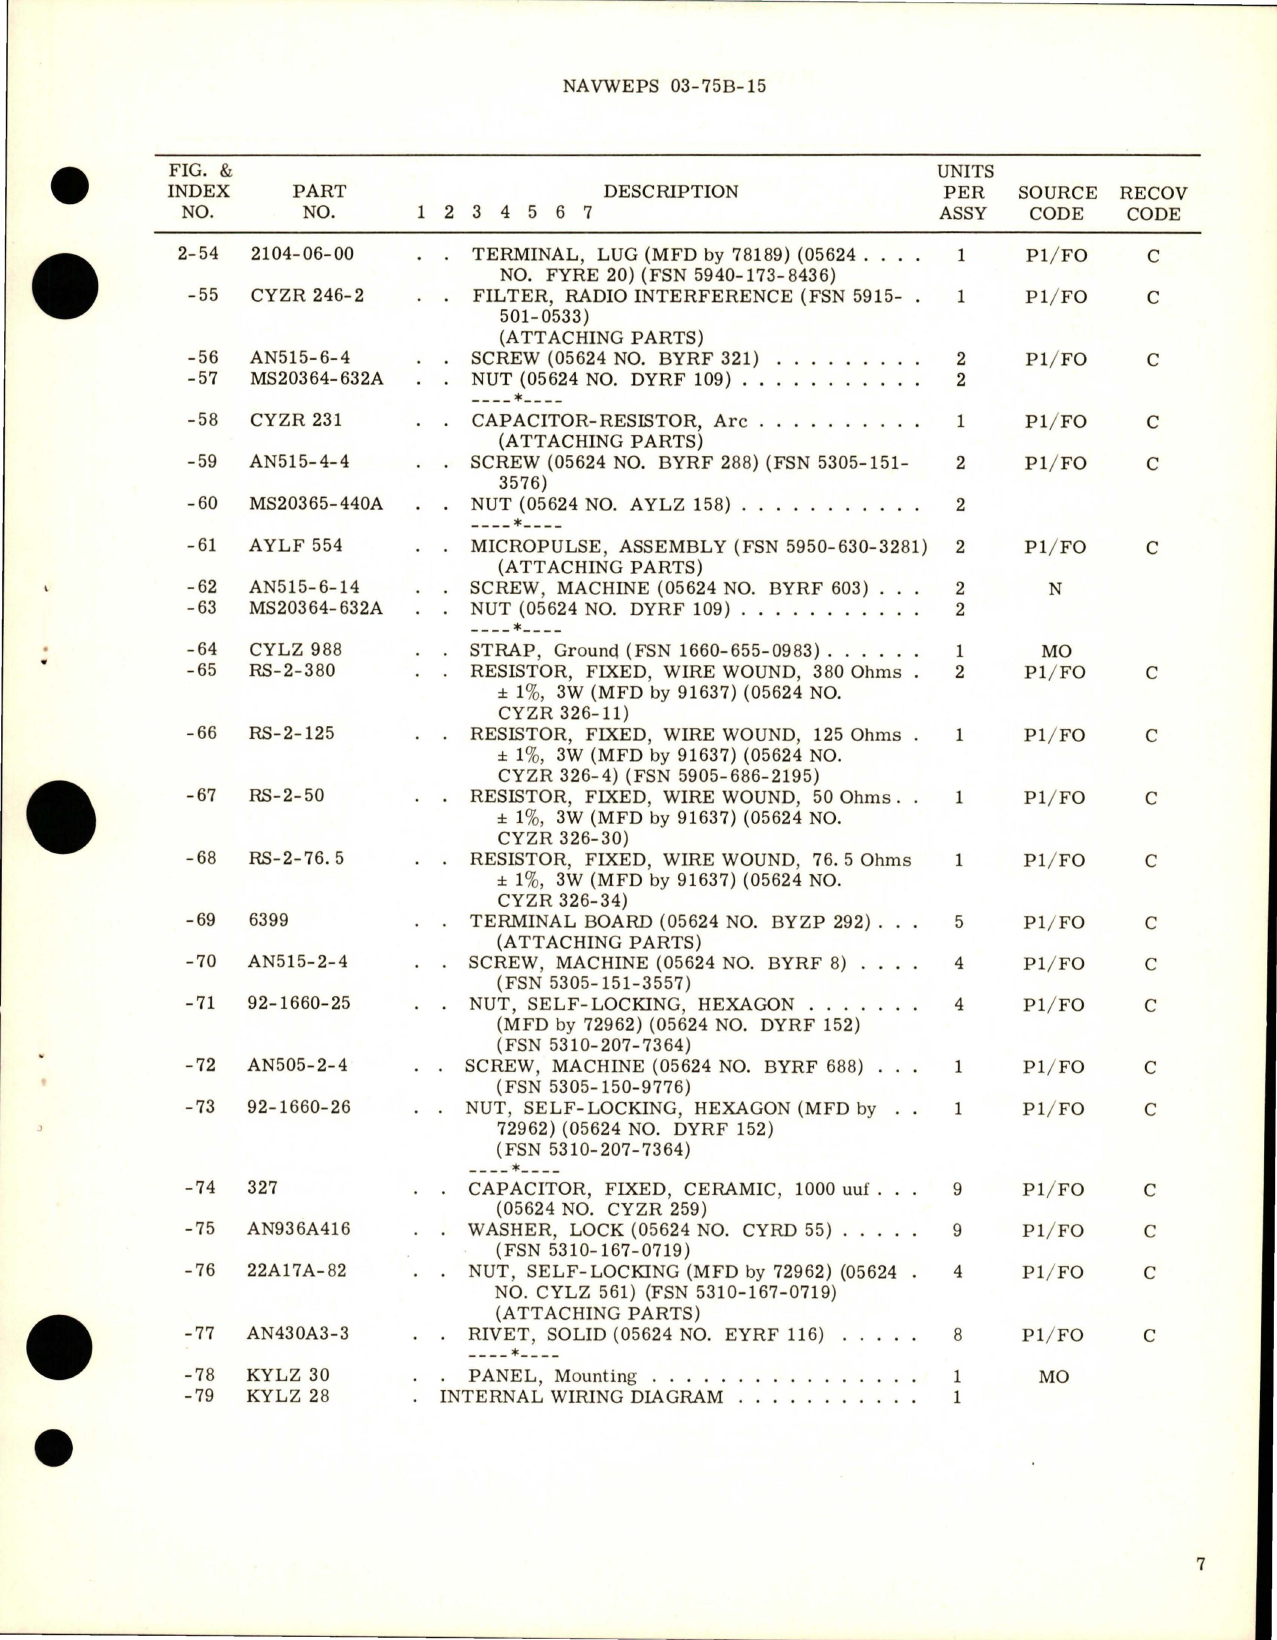 Sample page 5 from AirCorps Library document: Overhaul Instructions with Parts Breakdown for Control Box Assembly - Part CYLZ 6034 